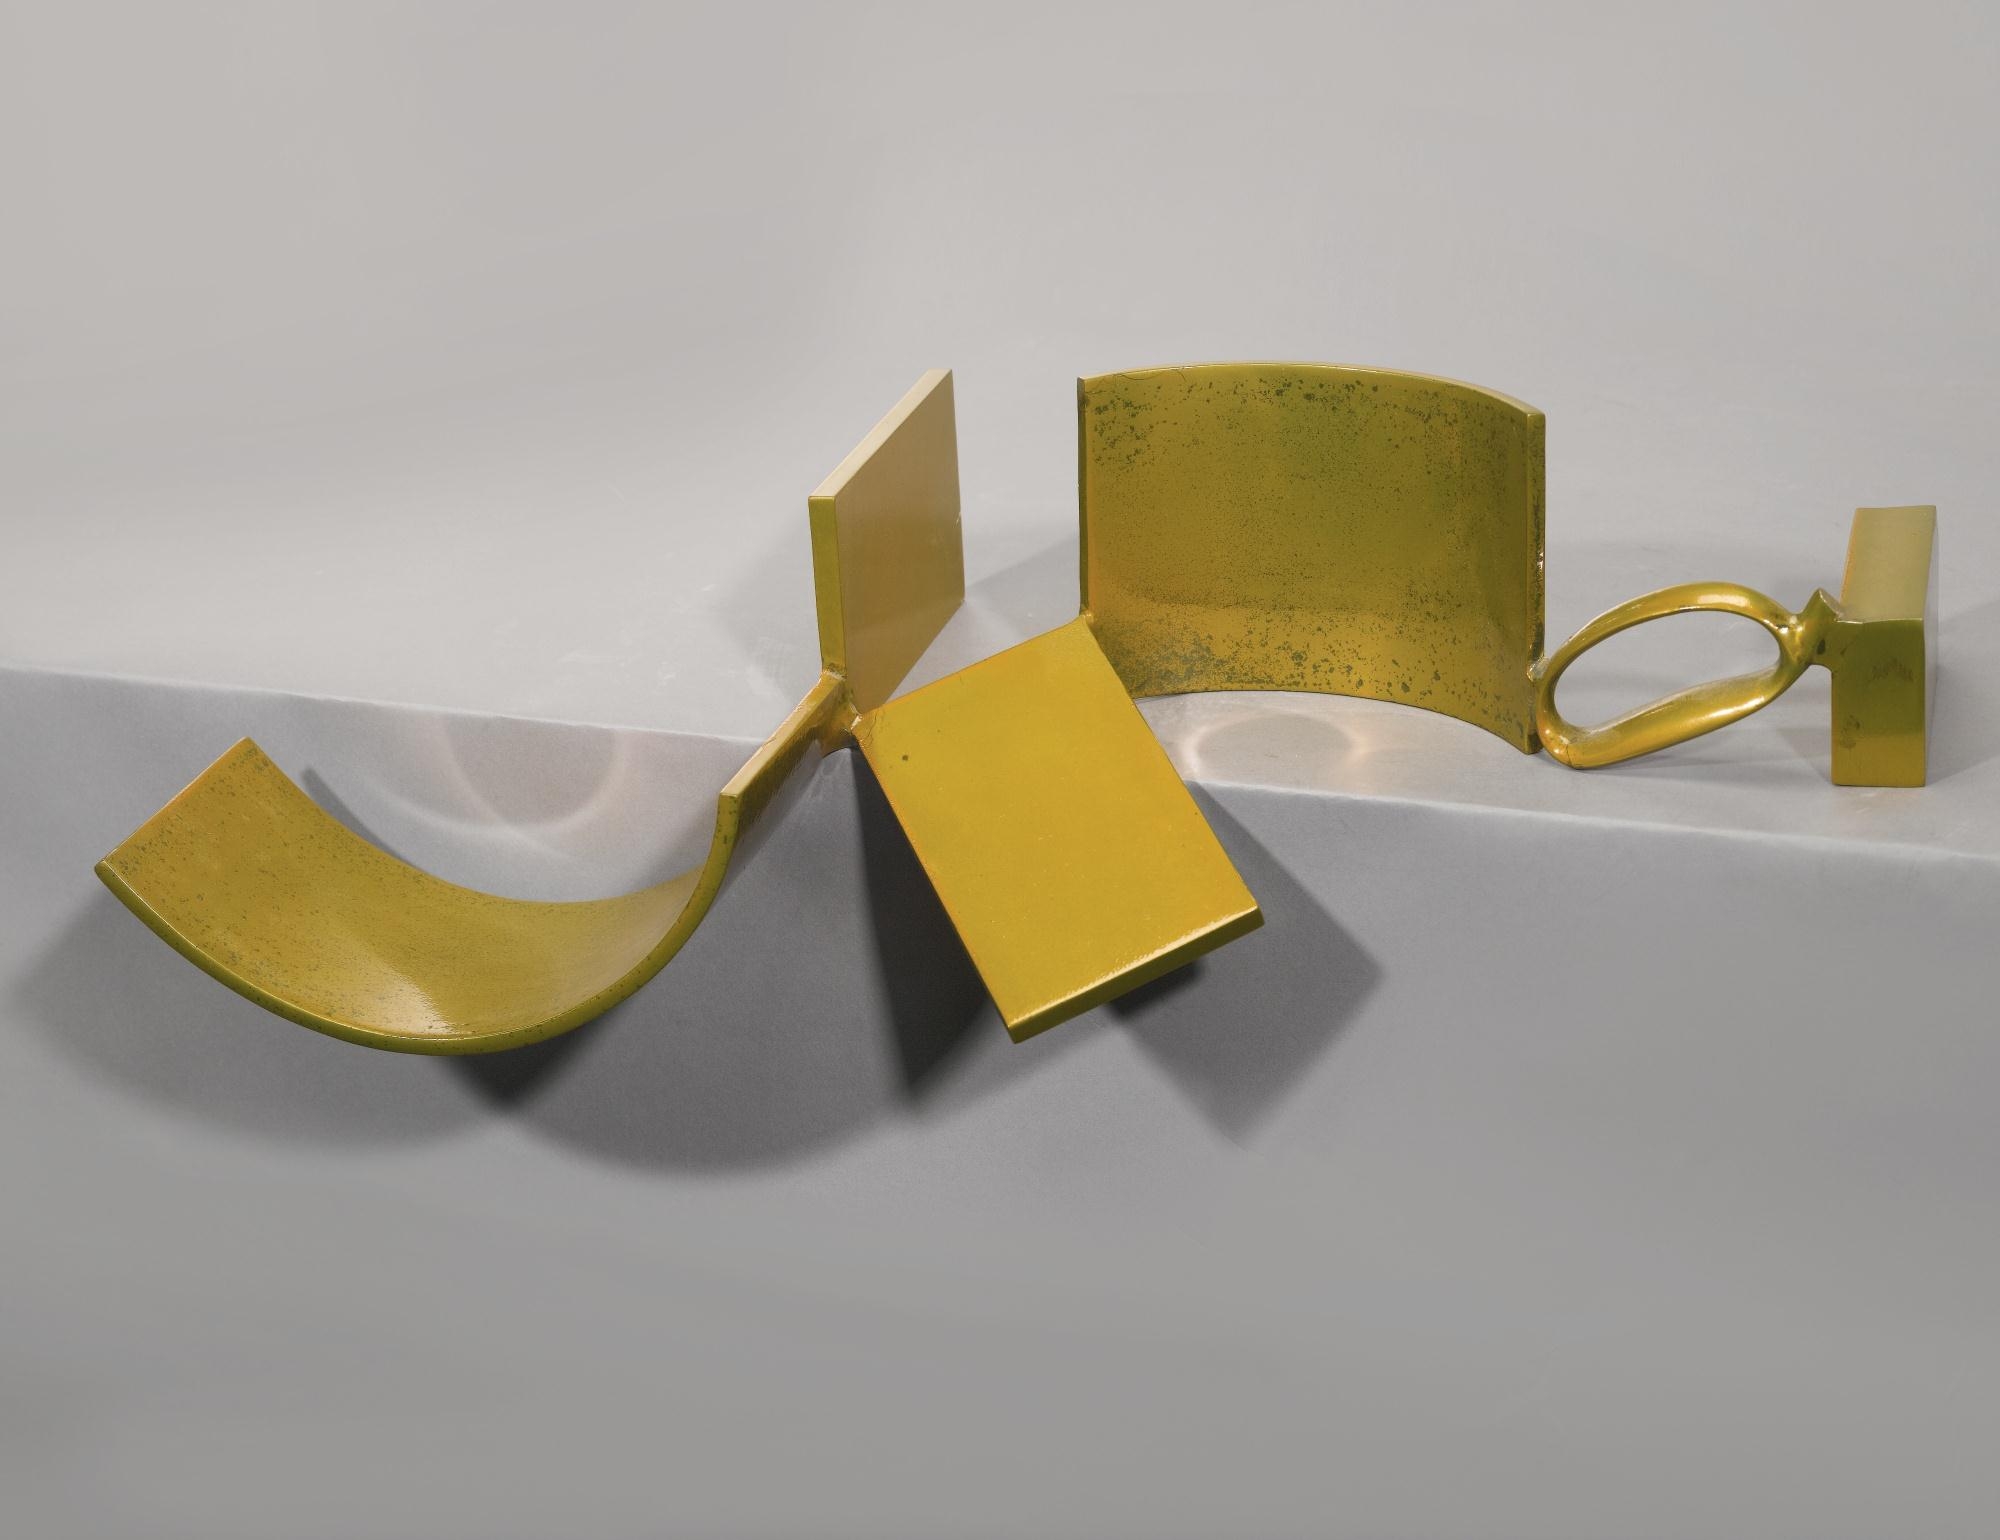 TABLE PIECE XC by Anthony Caro, 1970